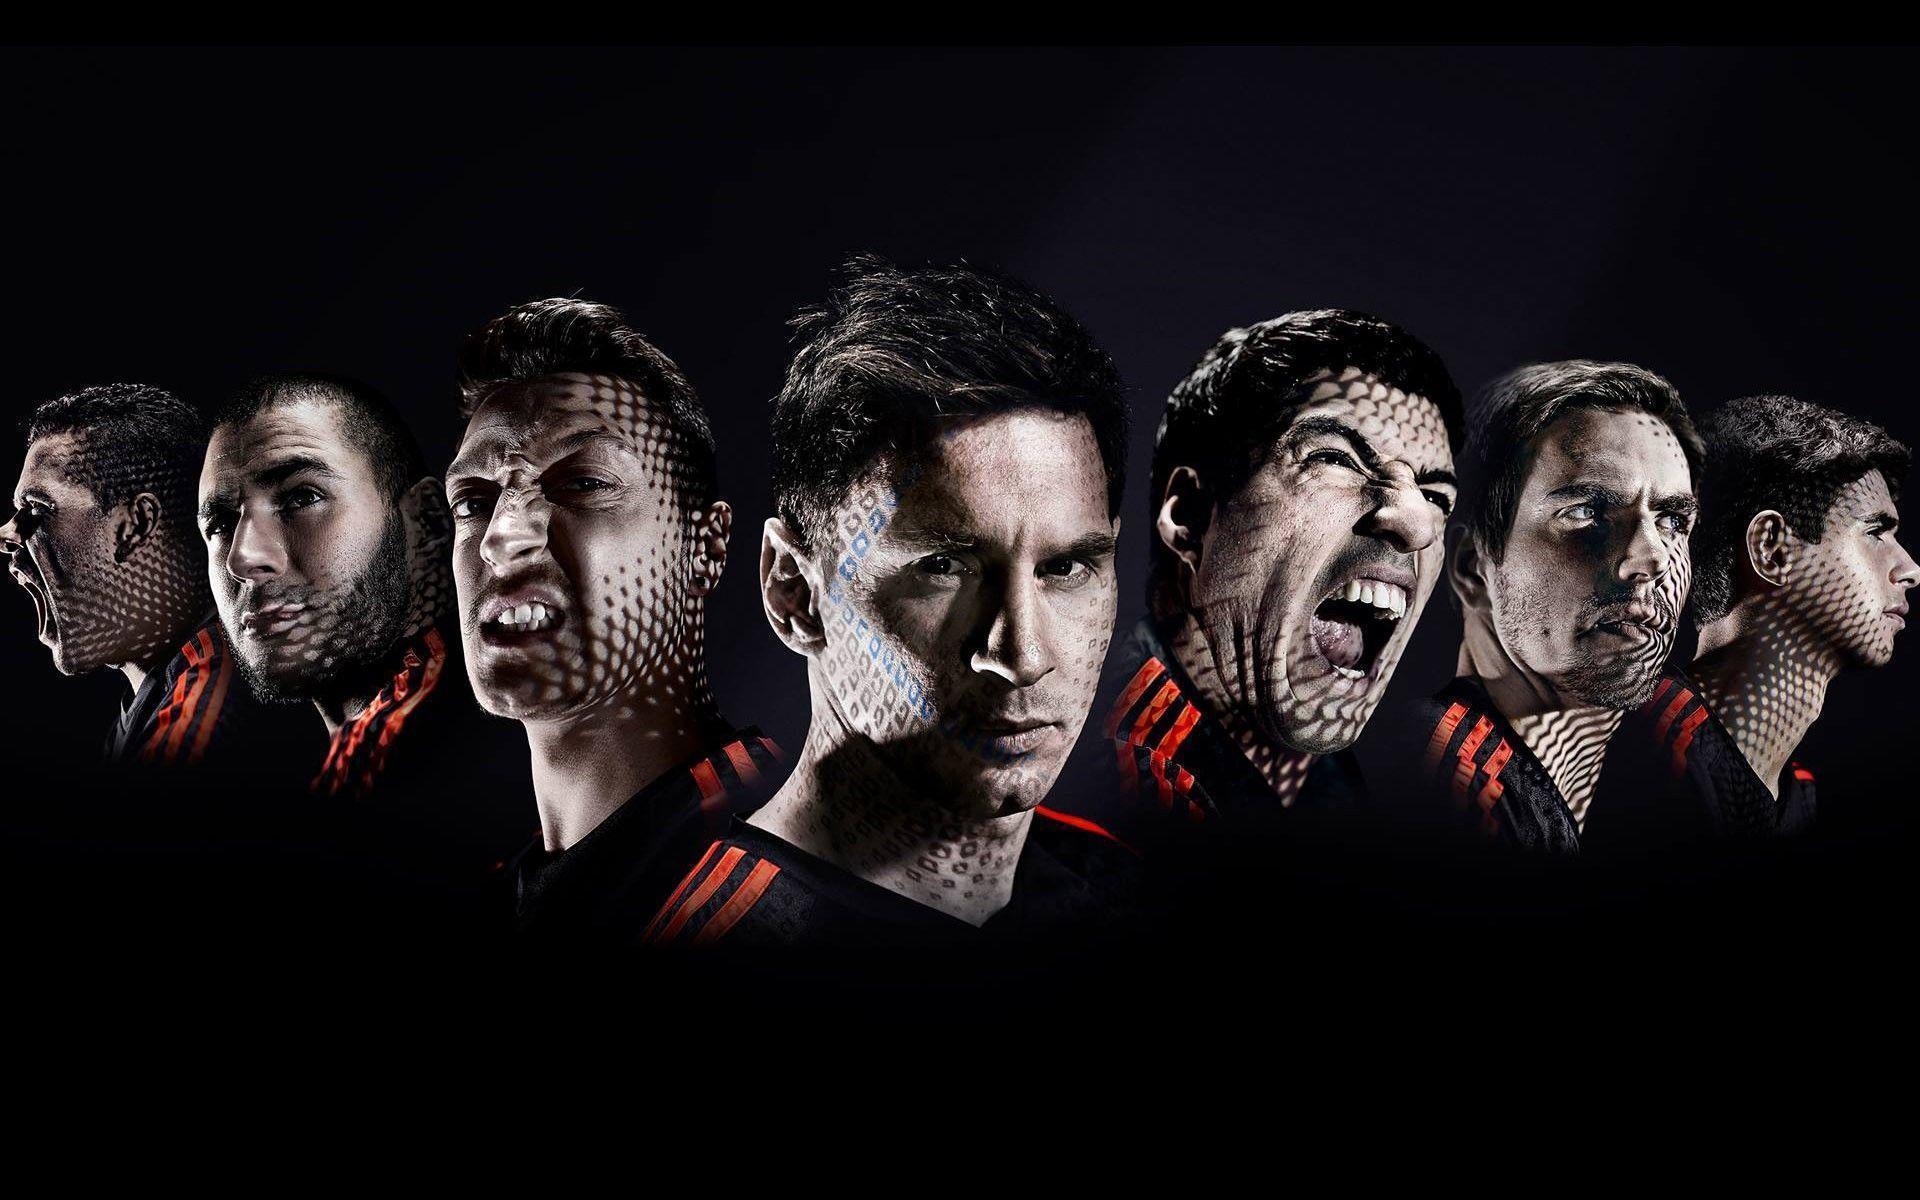 Adidas Battle Pack 2014 FIFA World Cup Wallpaper Wide or HD. Male